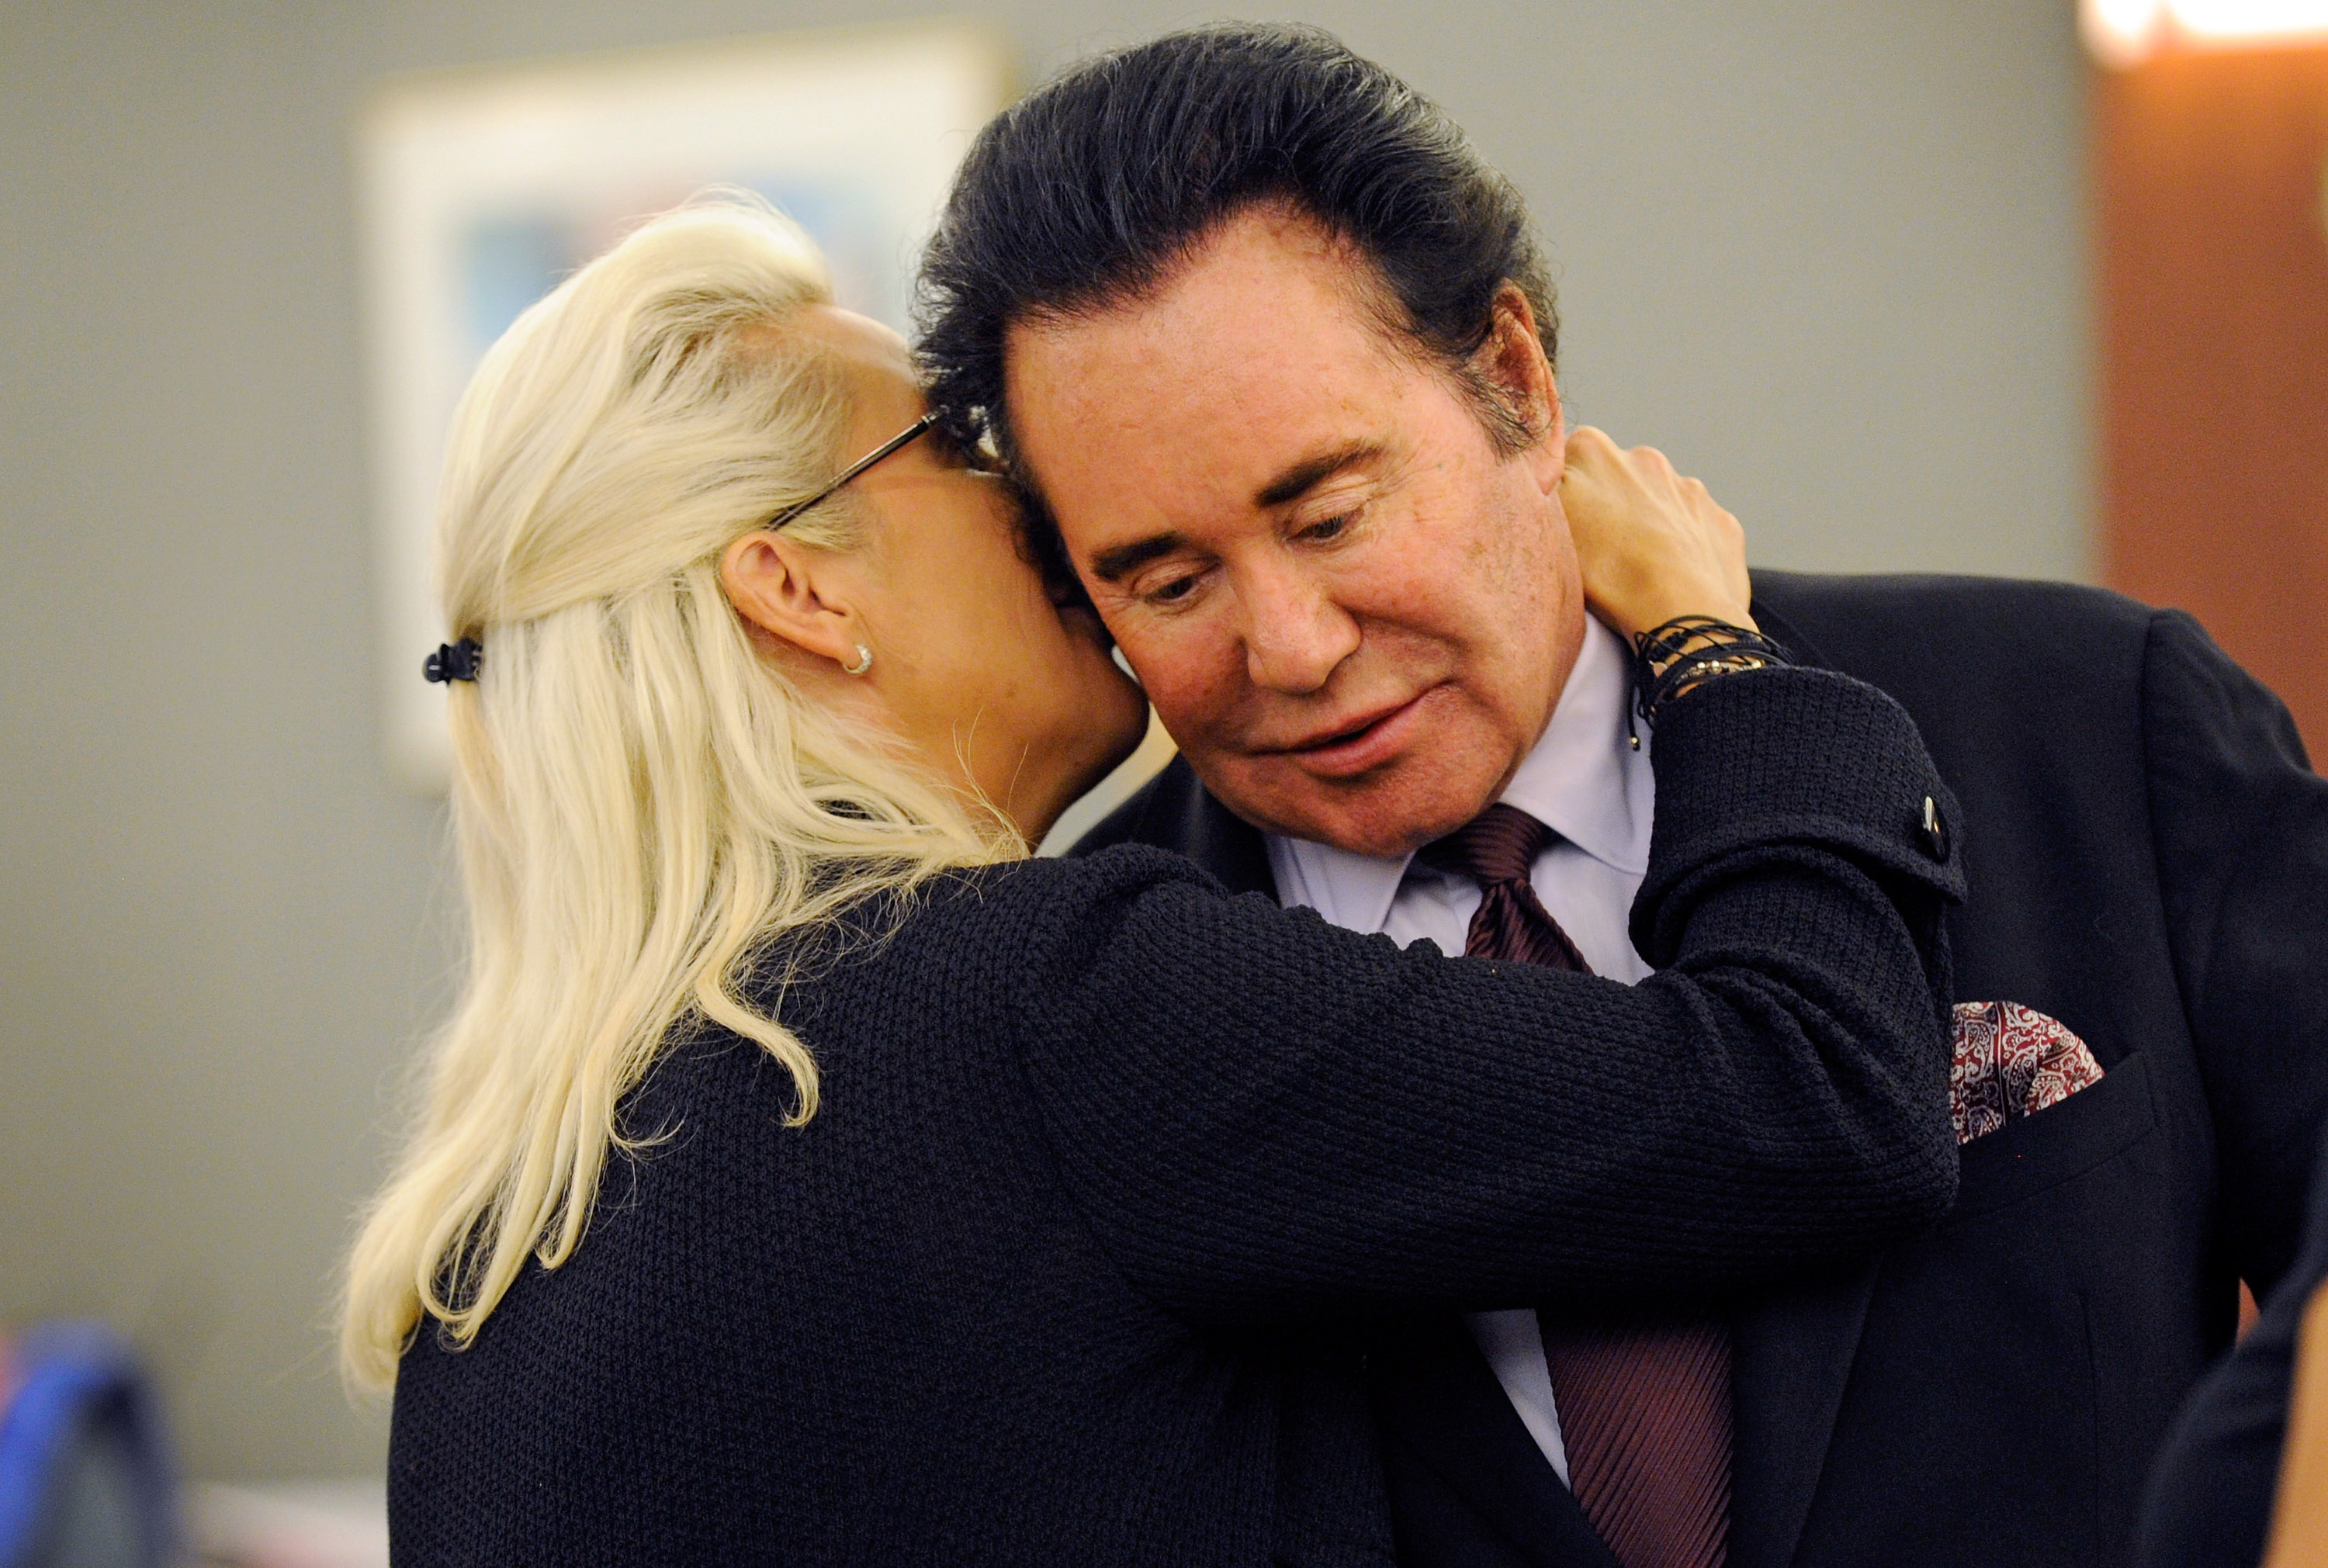 Kathleen McCrone Newton (L) whispers to her husband, entertainer Wayne Newton, during a court recess at the Clark County Regional Justice Center on August 1, 2012 in Las Vegas, Nevada. | Source: Getty Images